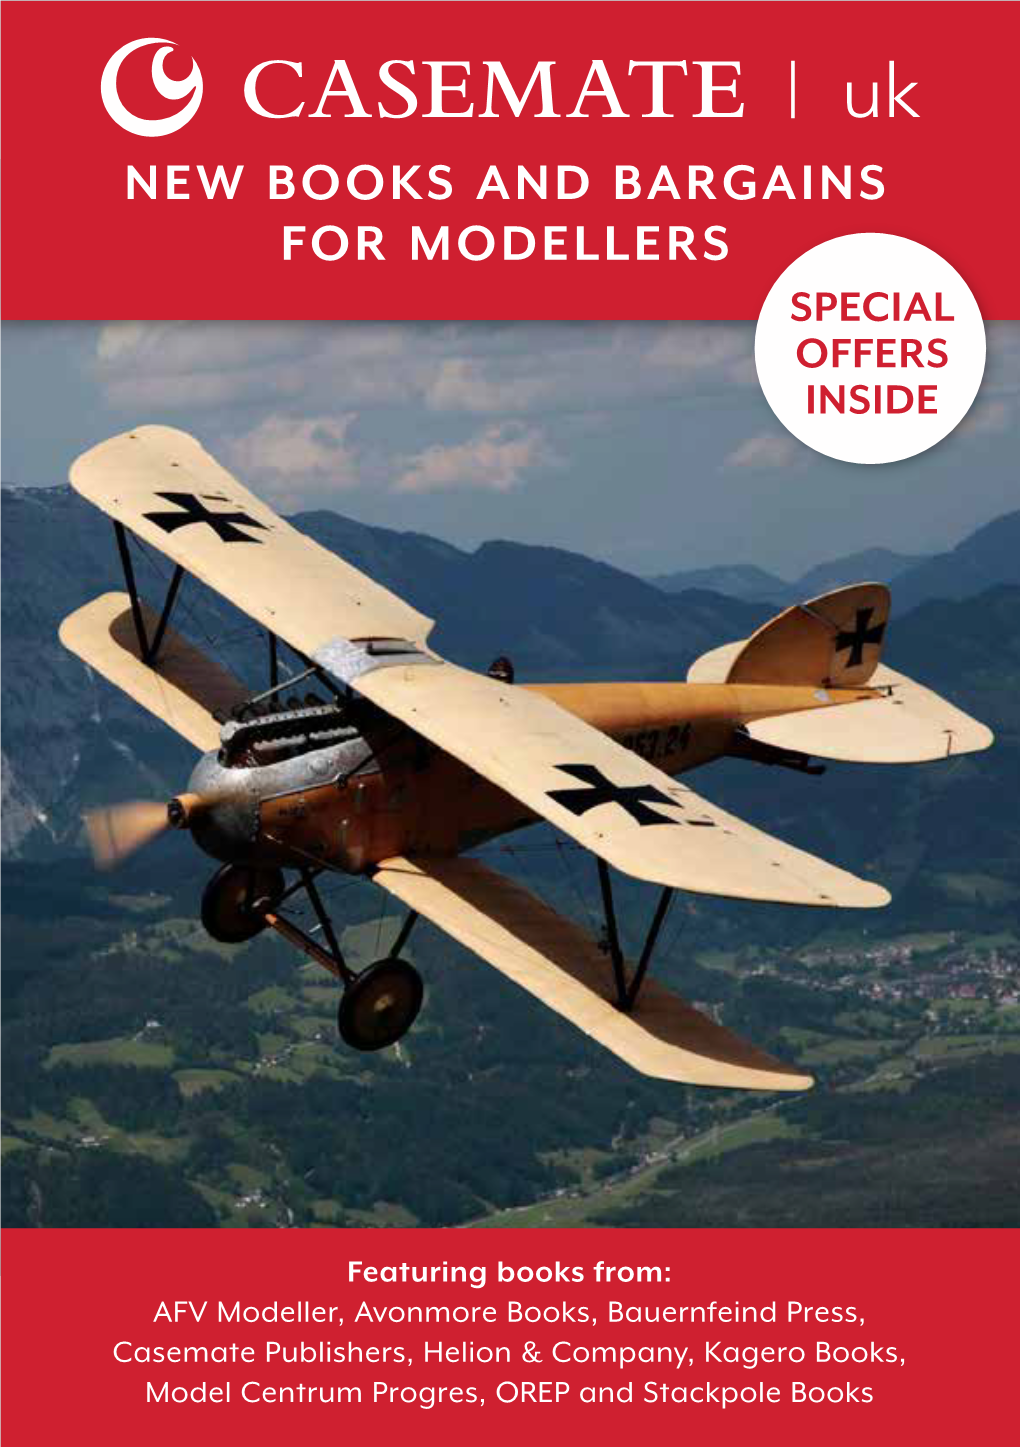 New Books and Bargains for Modellers Special Offers Inside